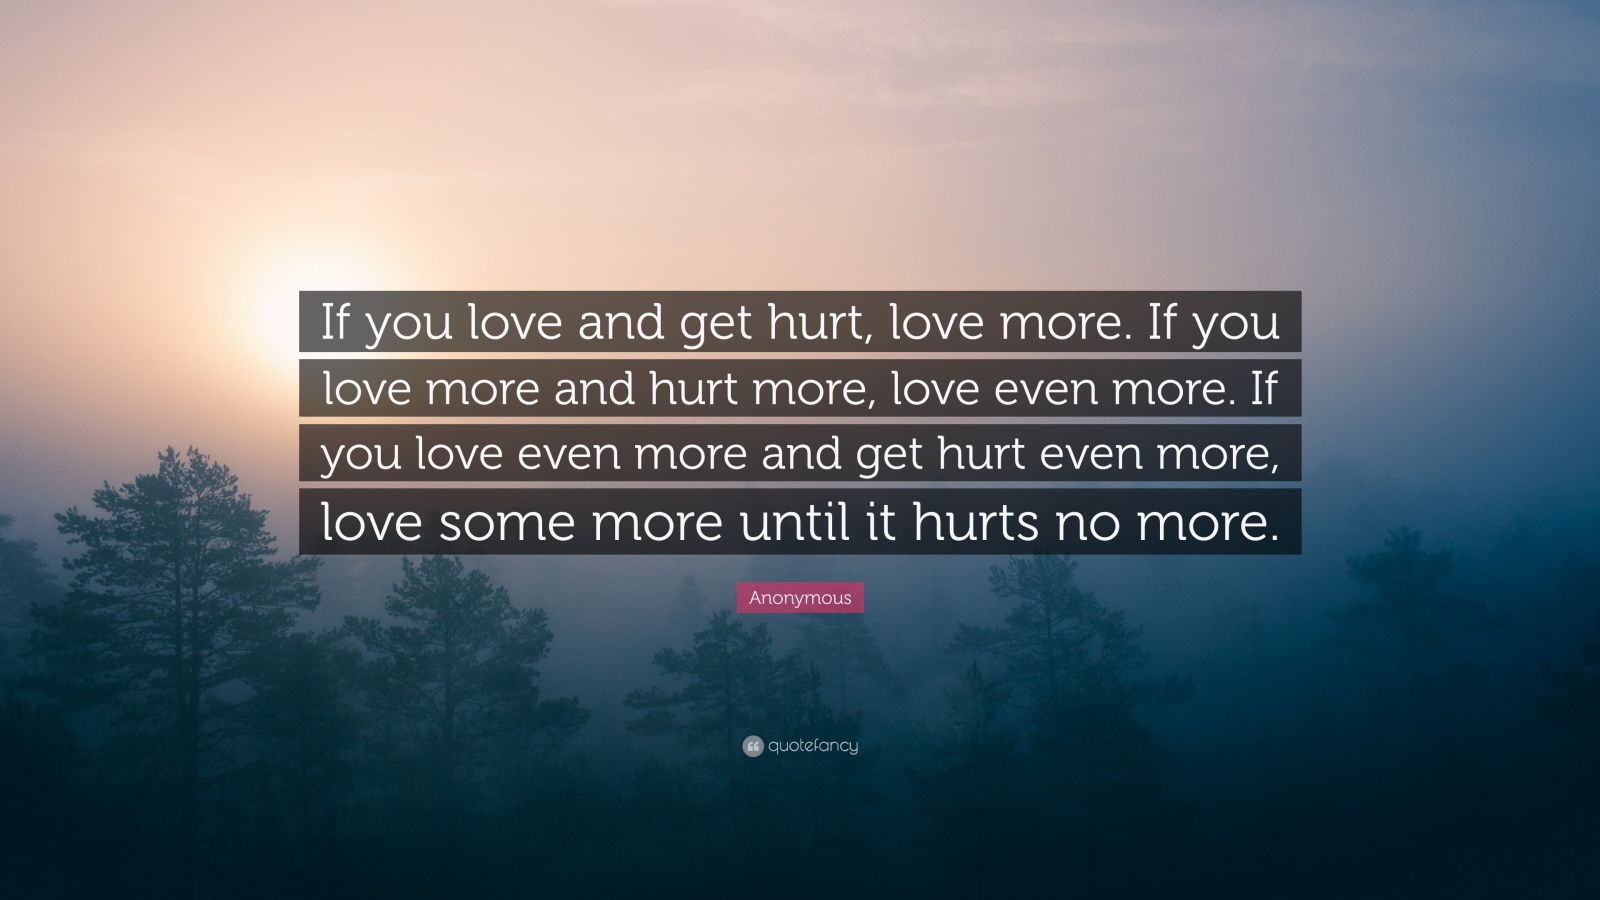 William Shakespeare Quote: “If you love and get hurt, love more. If you